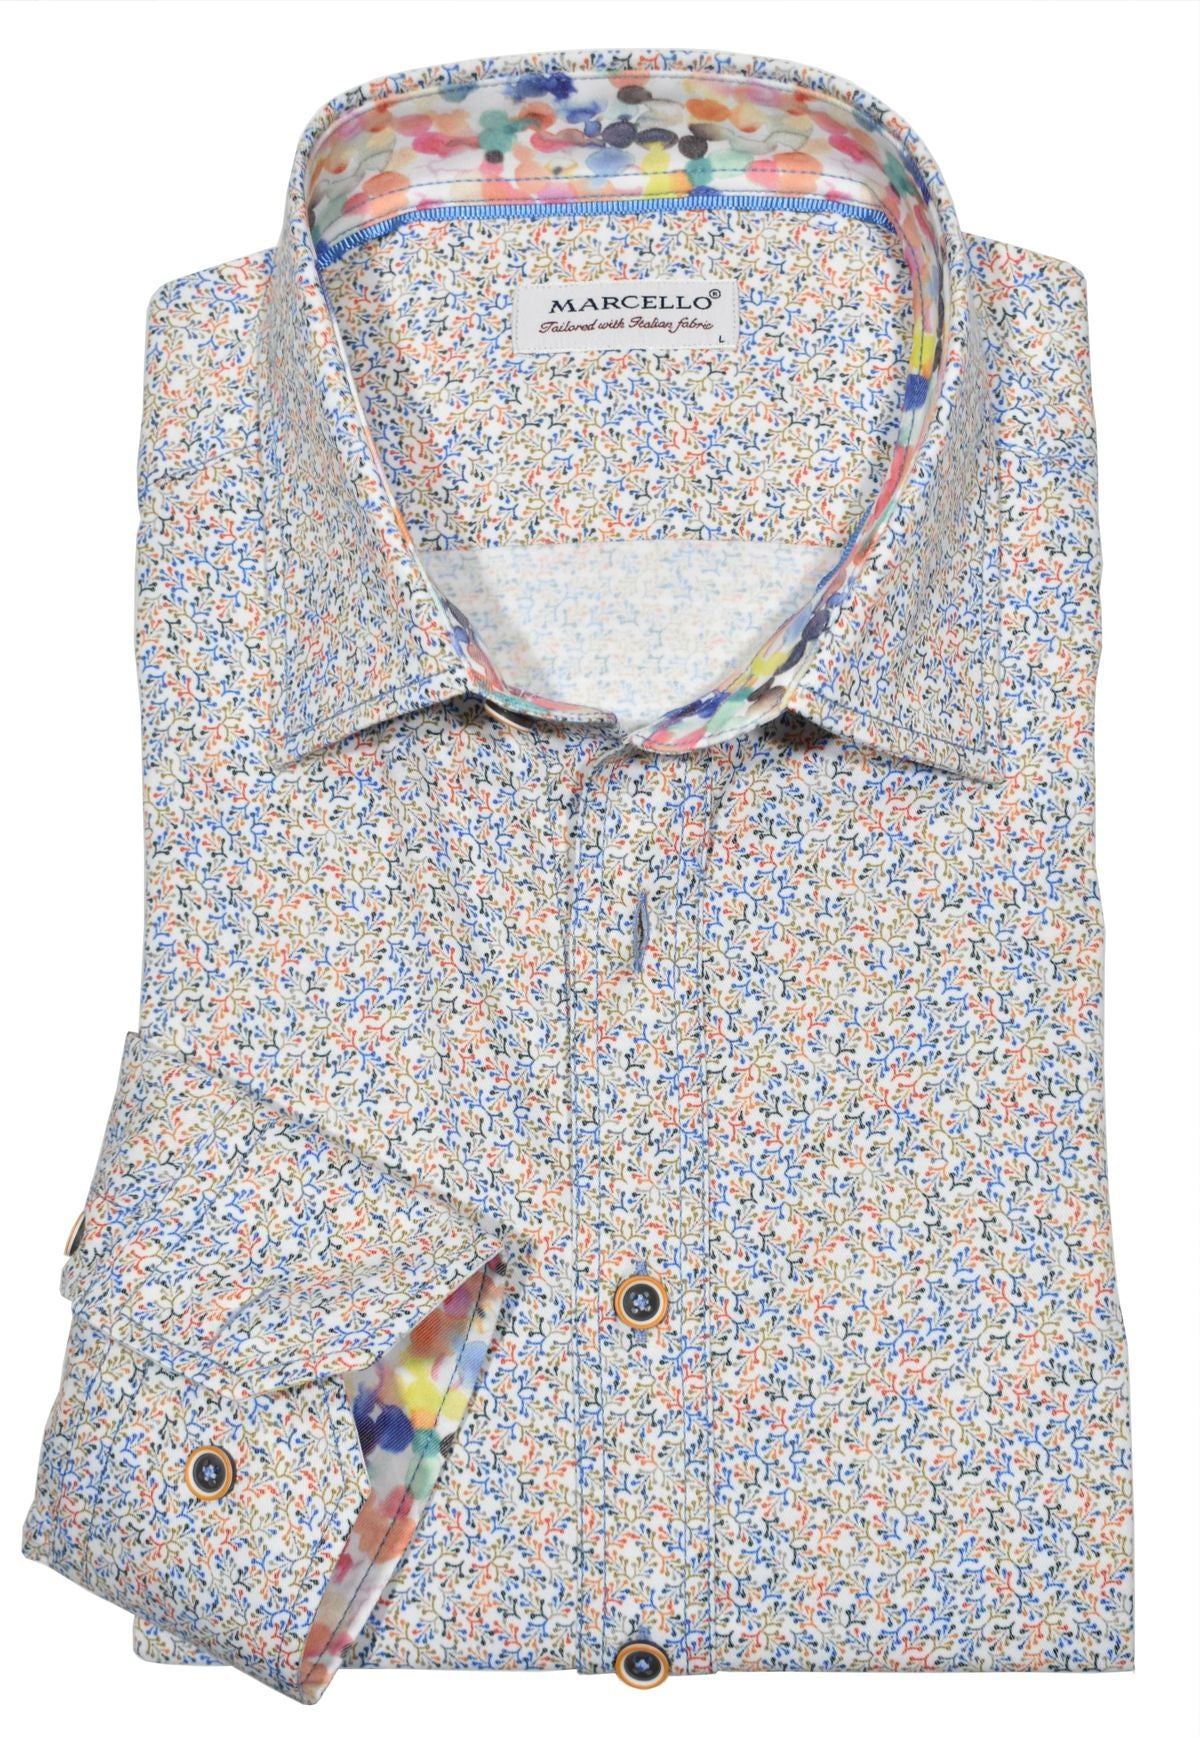 The beauty of this abstract print shirt is in its colors and traditional style. An array of Spring colors with contrast stitch detailing create an unforgettable look. Plus, the matched buttons and contrast neck tape and trim fabric complete the look. Shirt by Marcello.